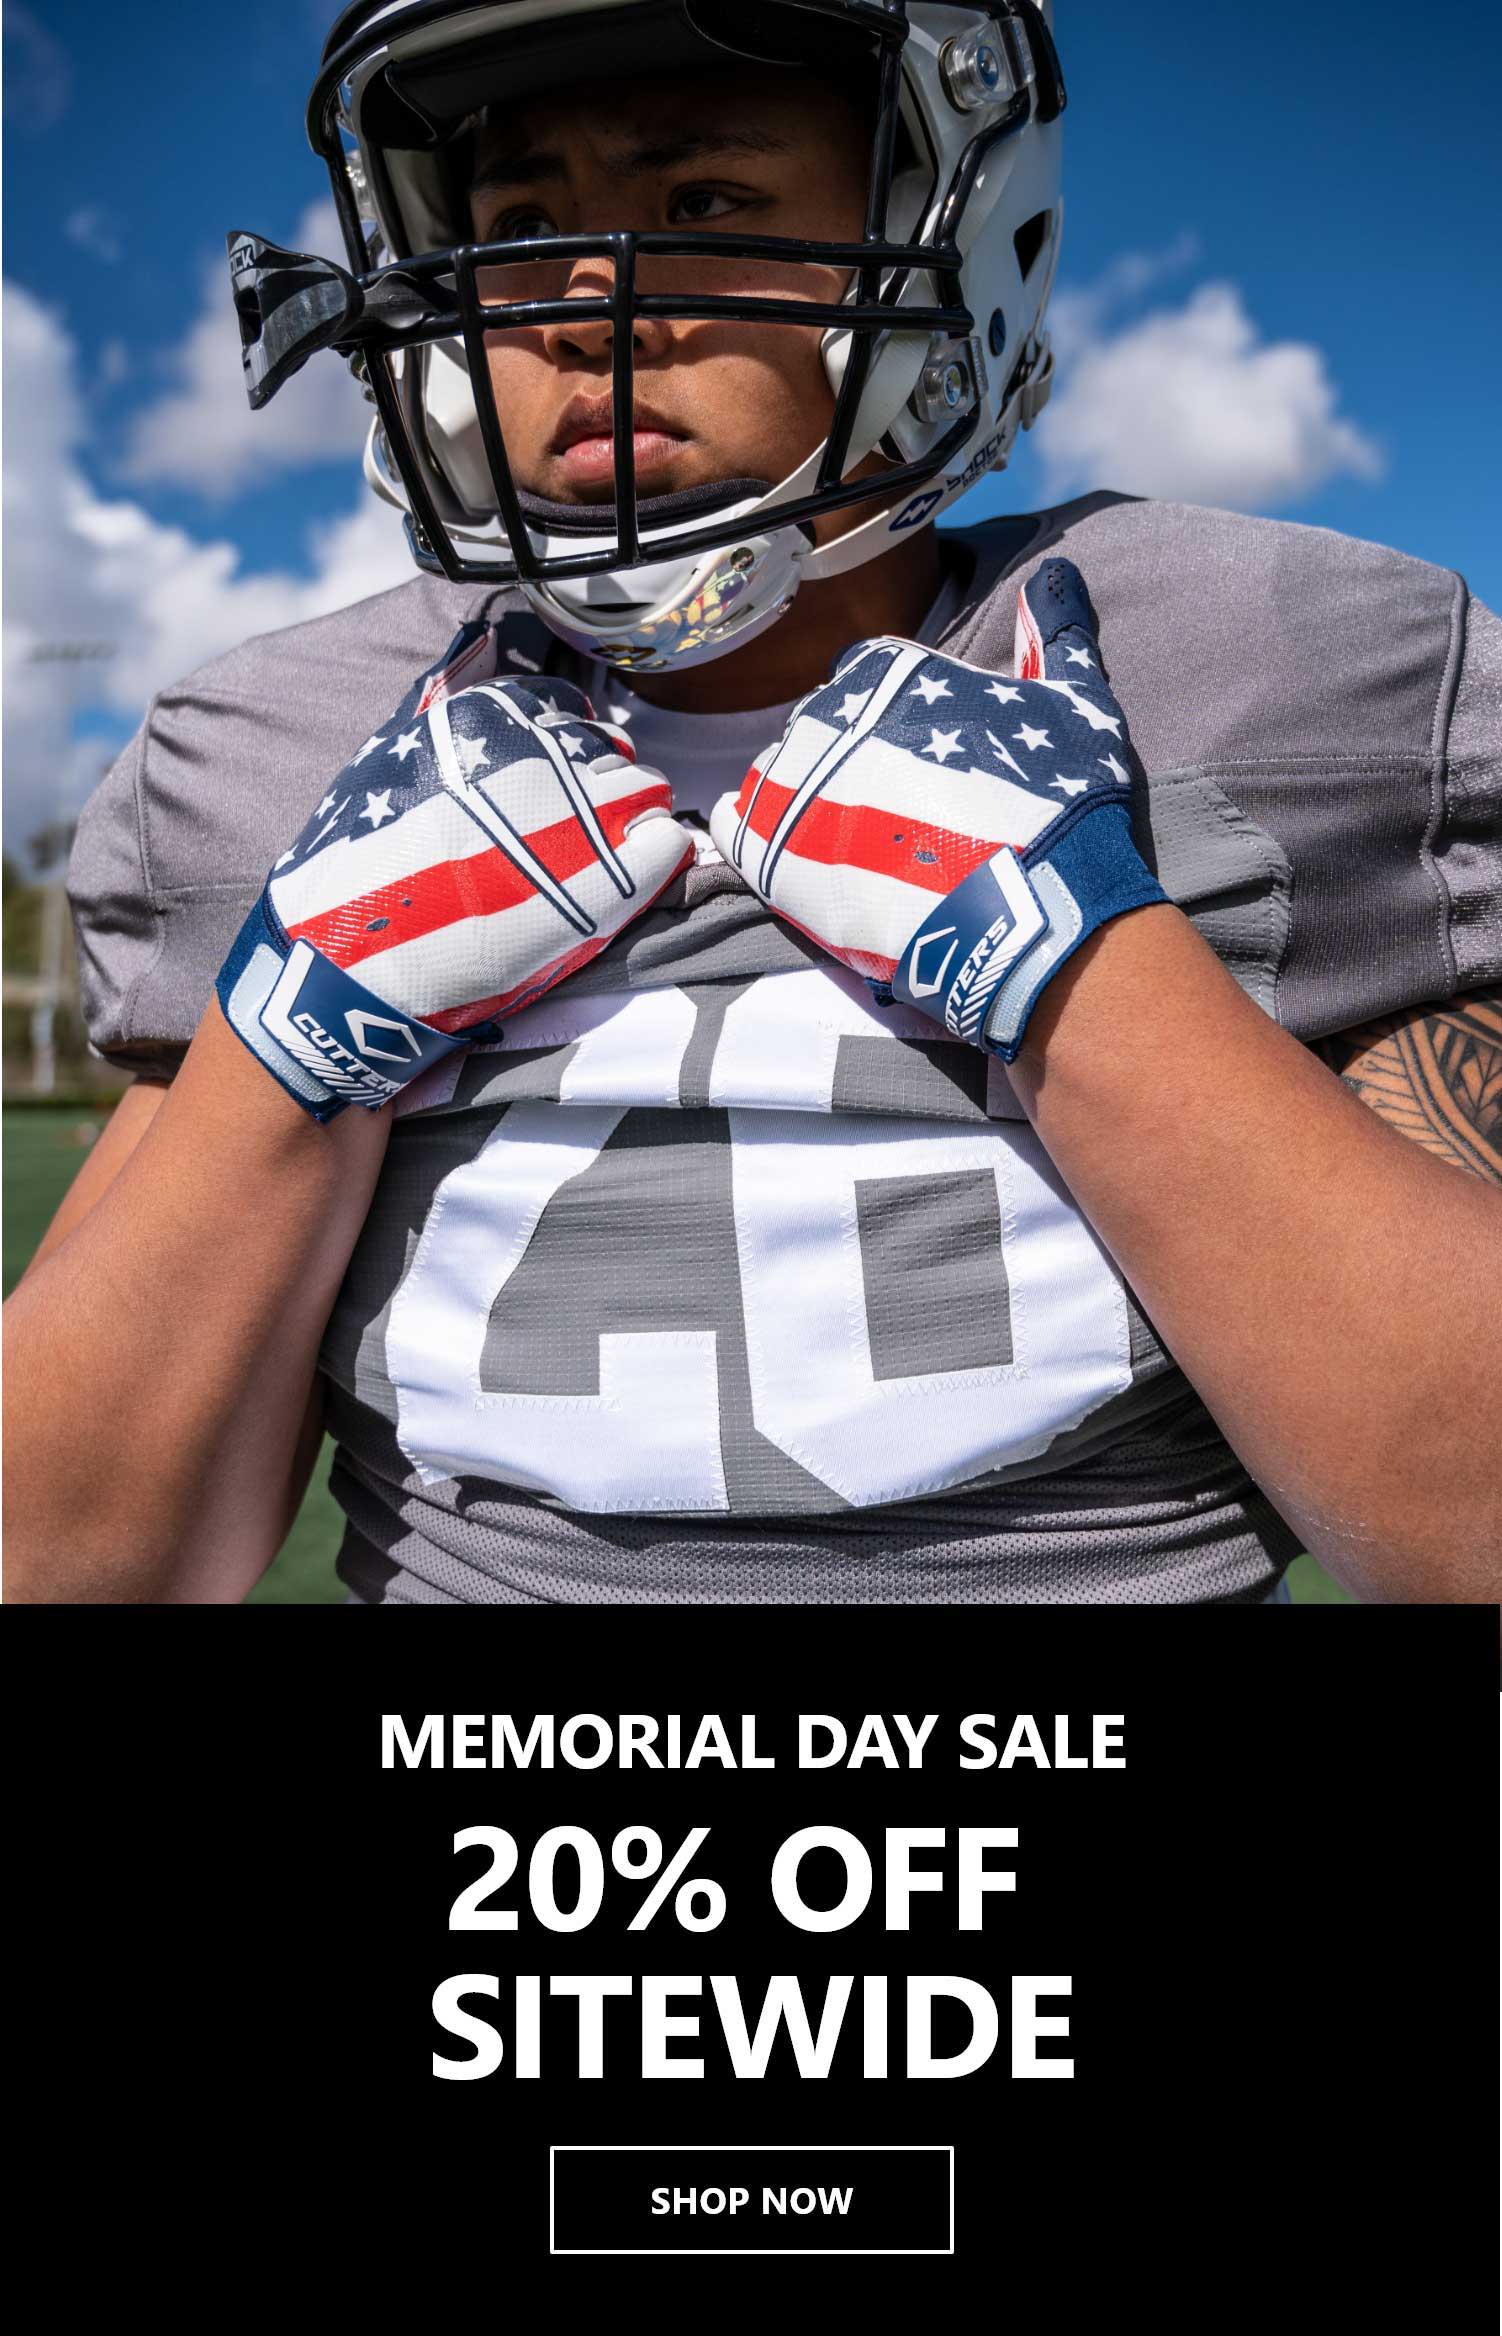 Memorial Day Sale - 20% Off Sitewide - Shop Now